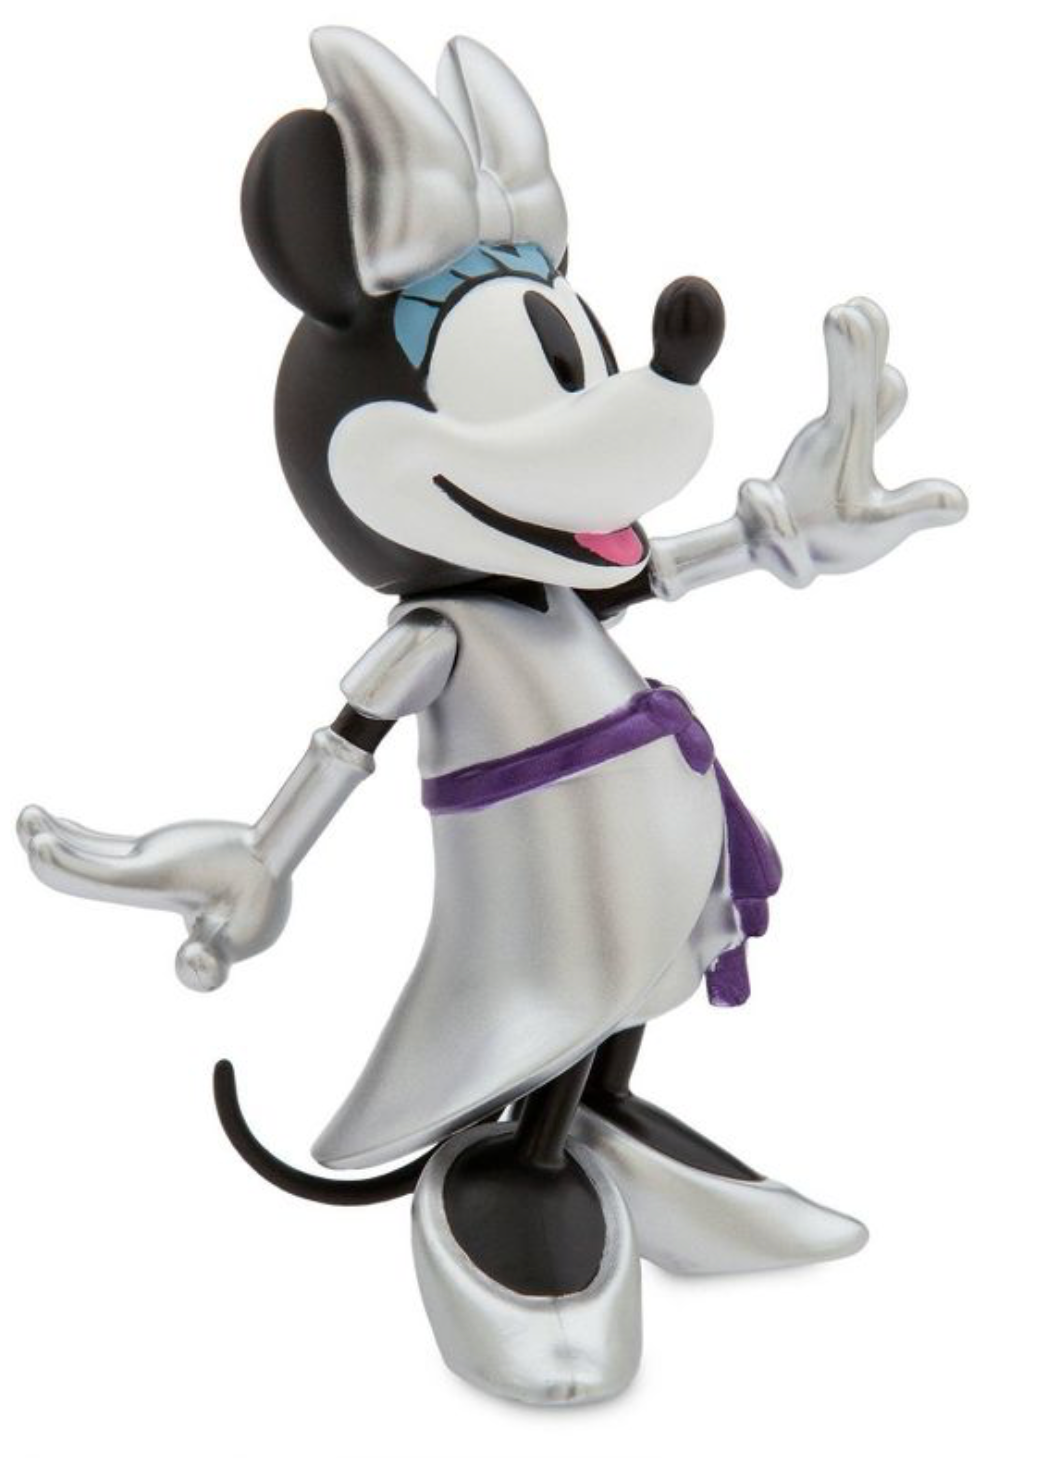 Disney 100 Years Celebration Minnie Articulated Vinyl Figurine New With Tag